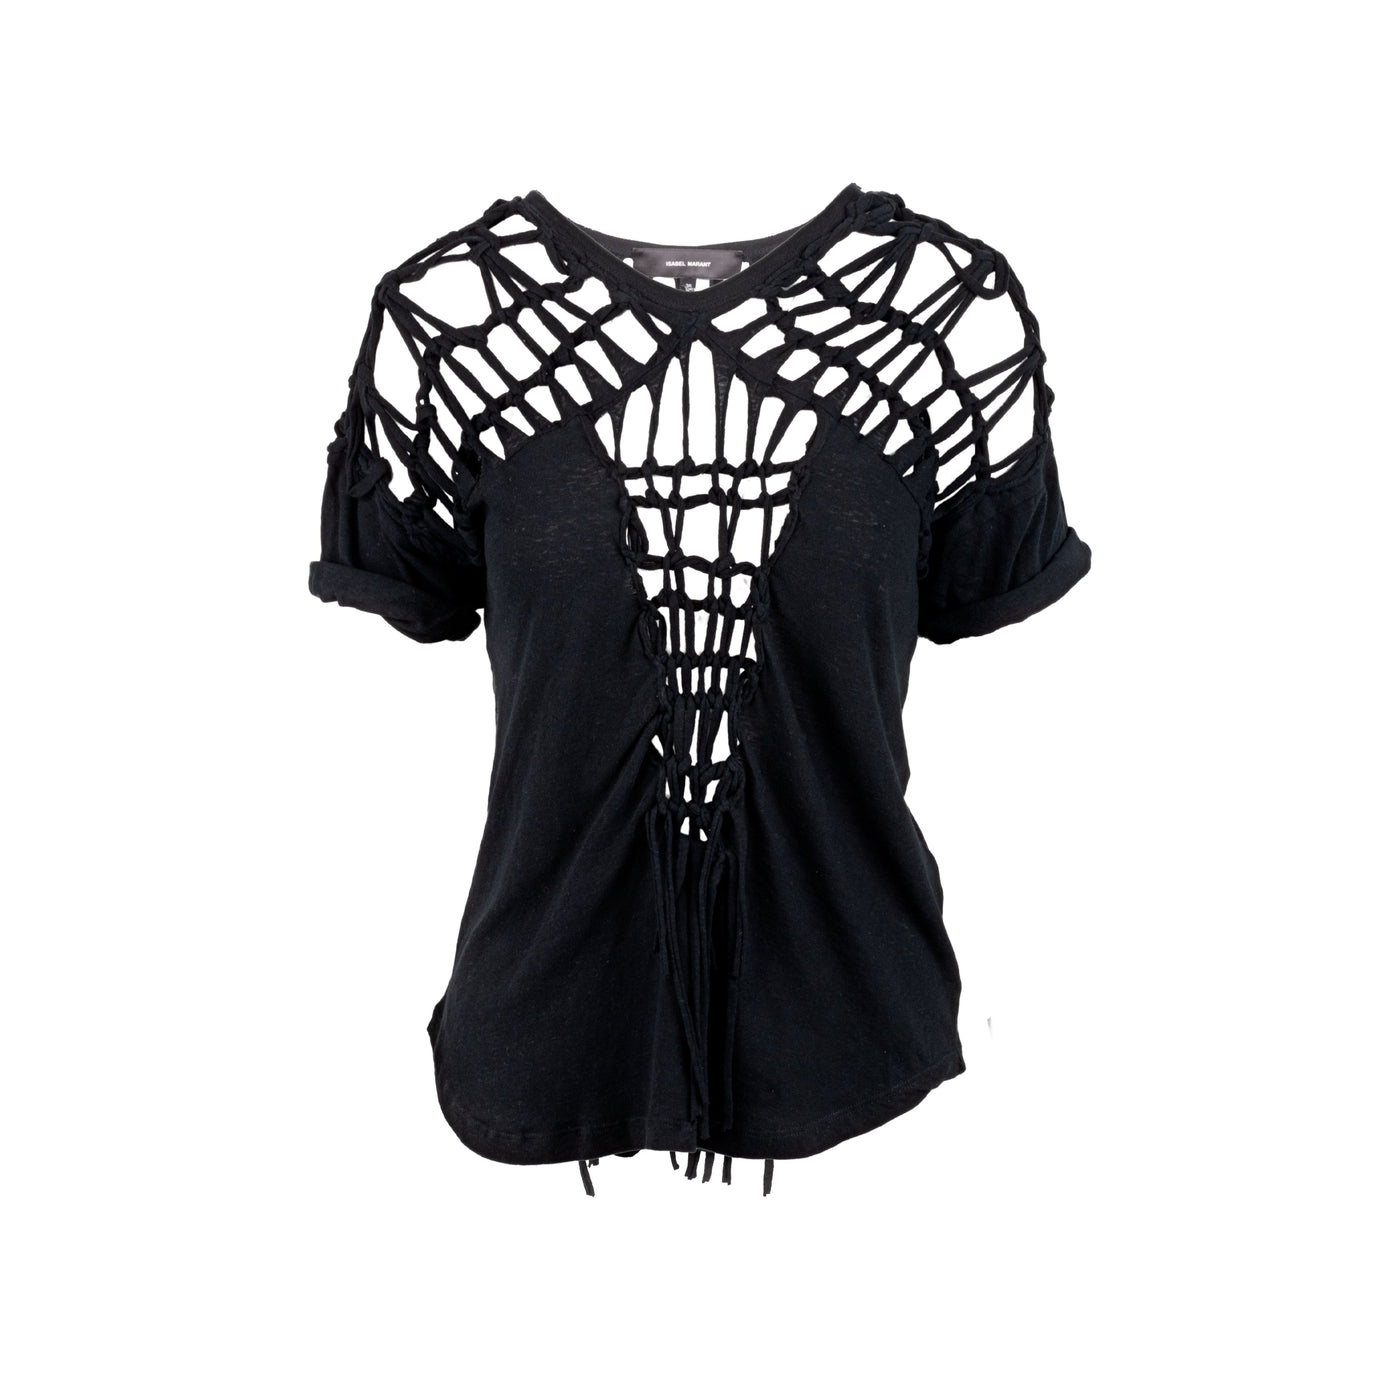 Isabel Marant black cotton braided top pre-owned